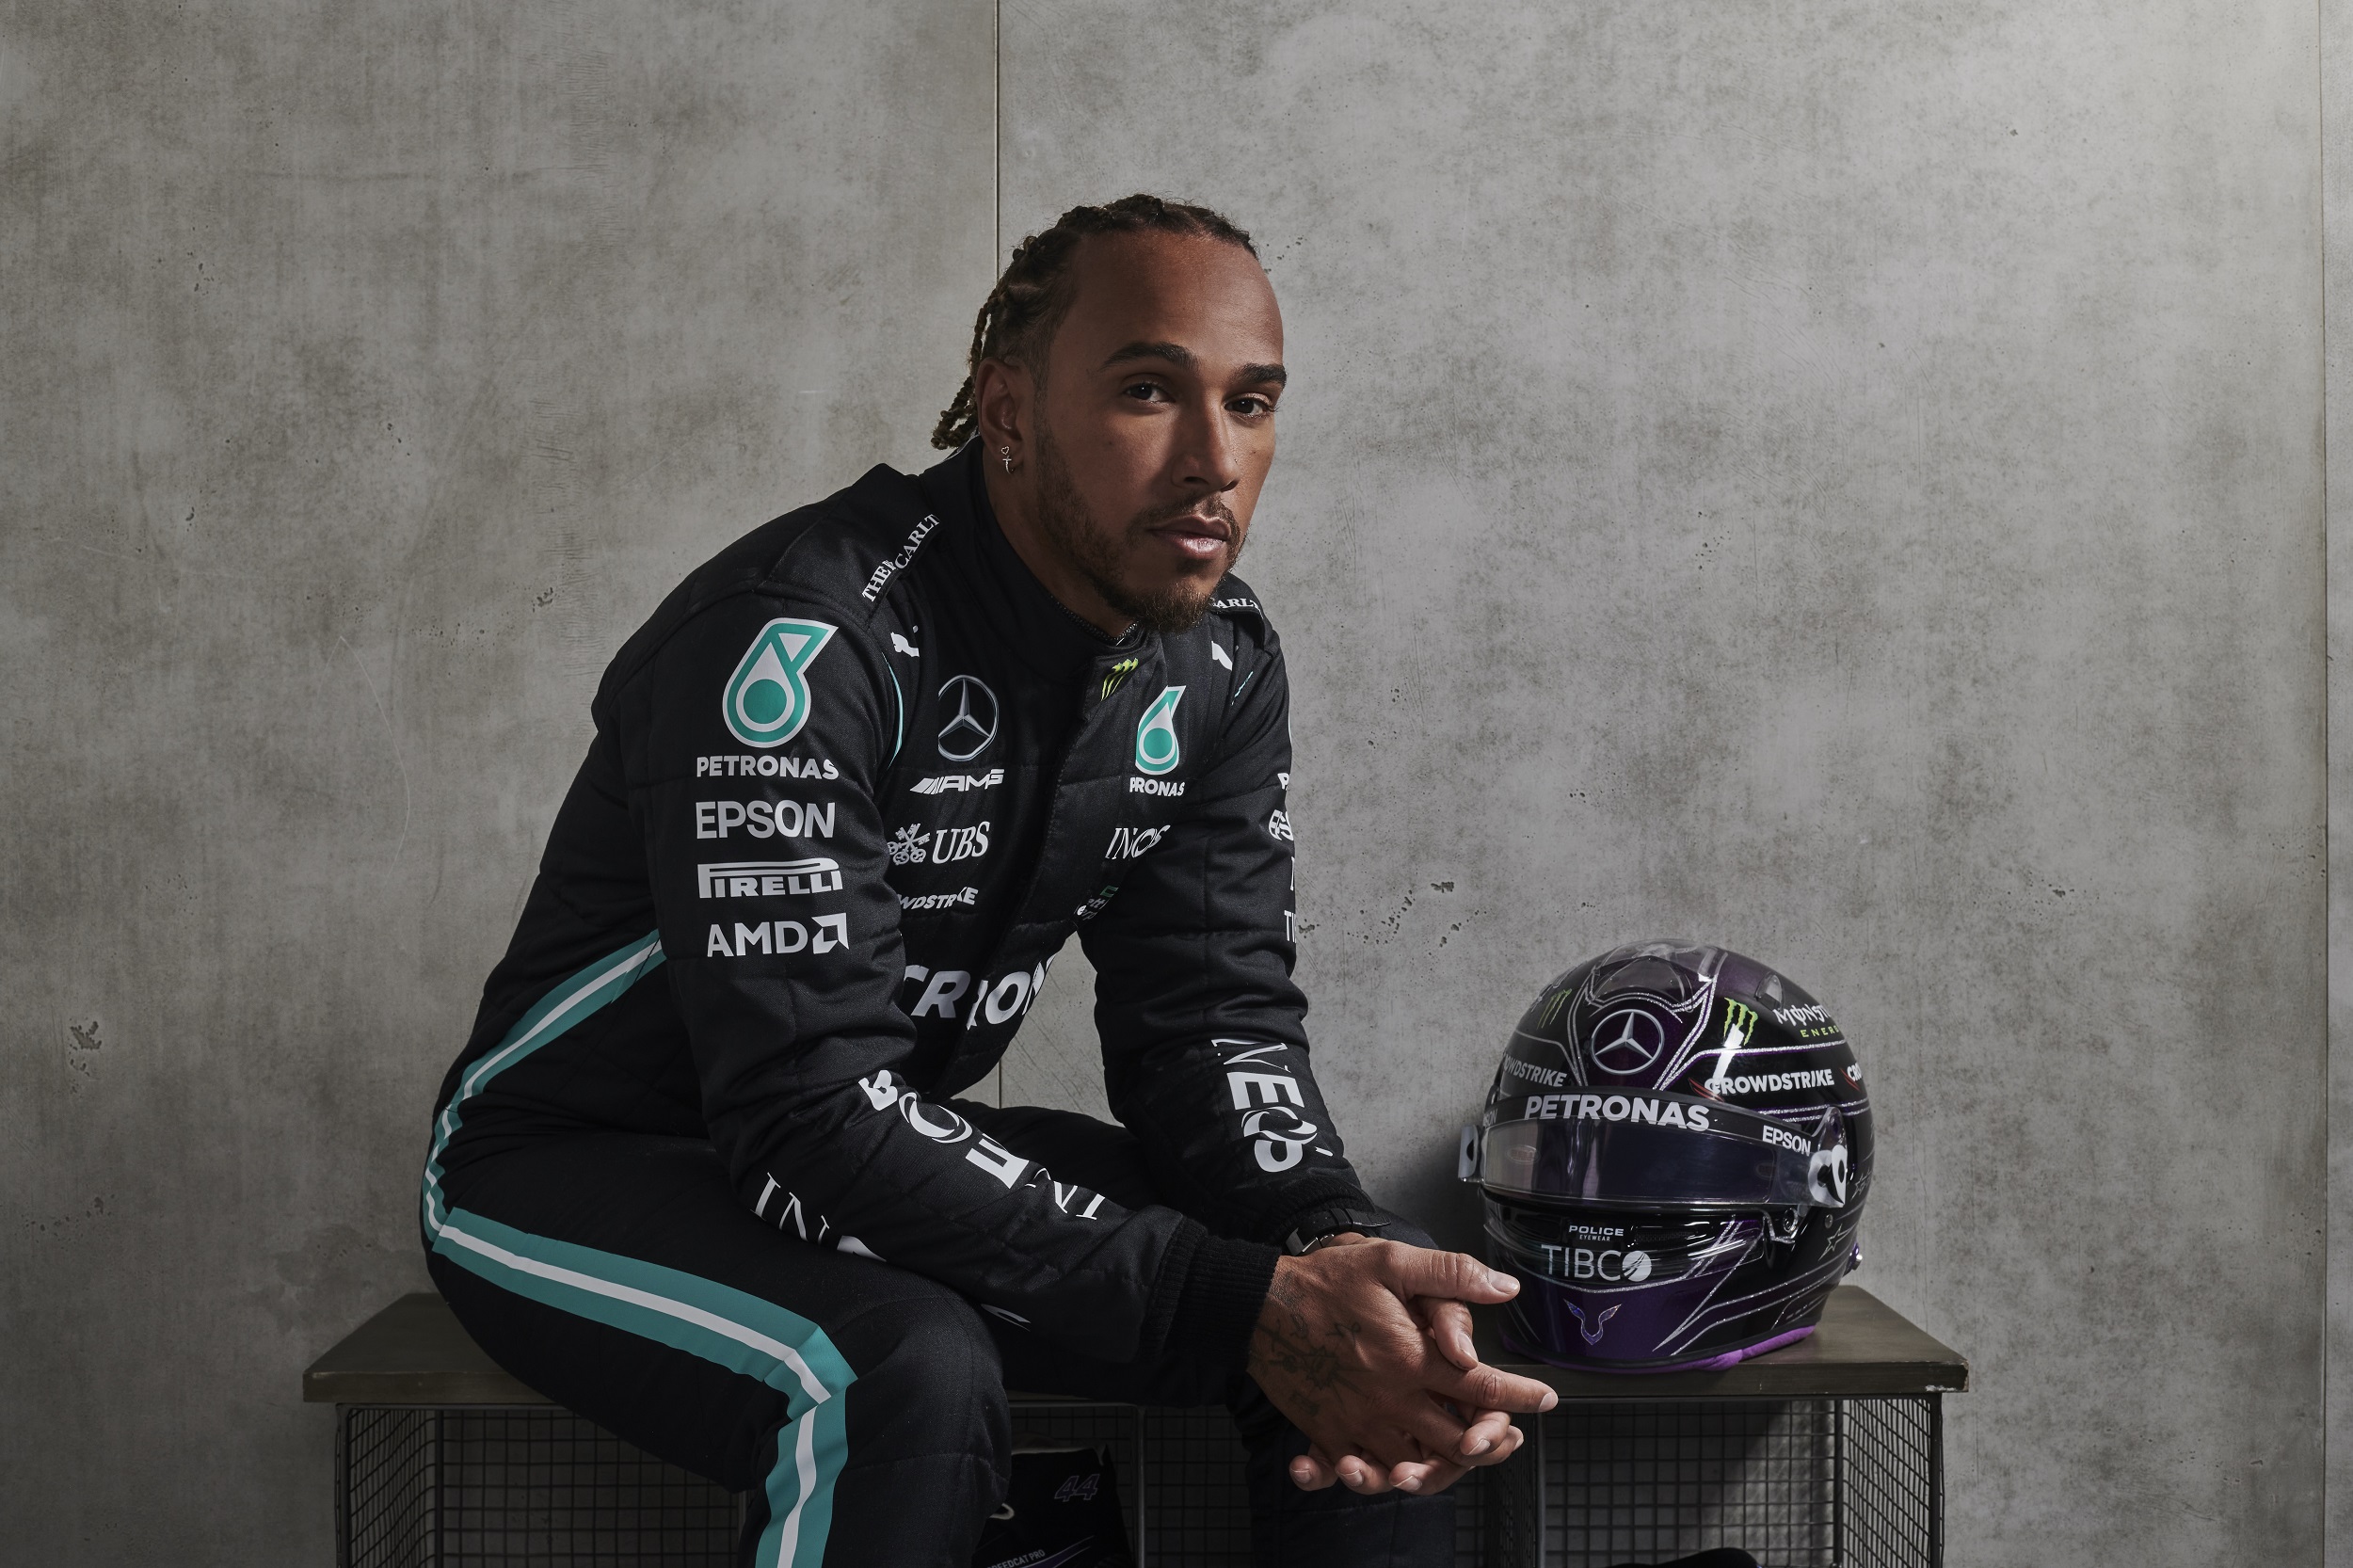 By all means, Lewis Hamilton chases an incredible milestone in his storied Formula 1 career. (Photo: Mercedes-AMG Petronas Formula One Team)